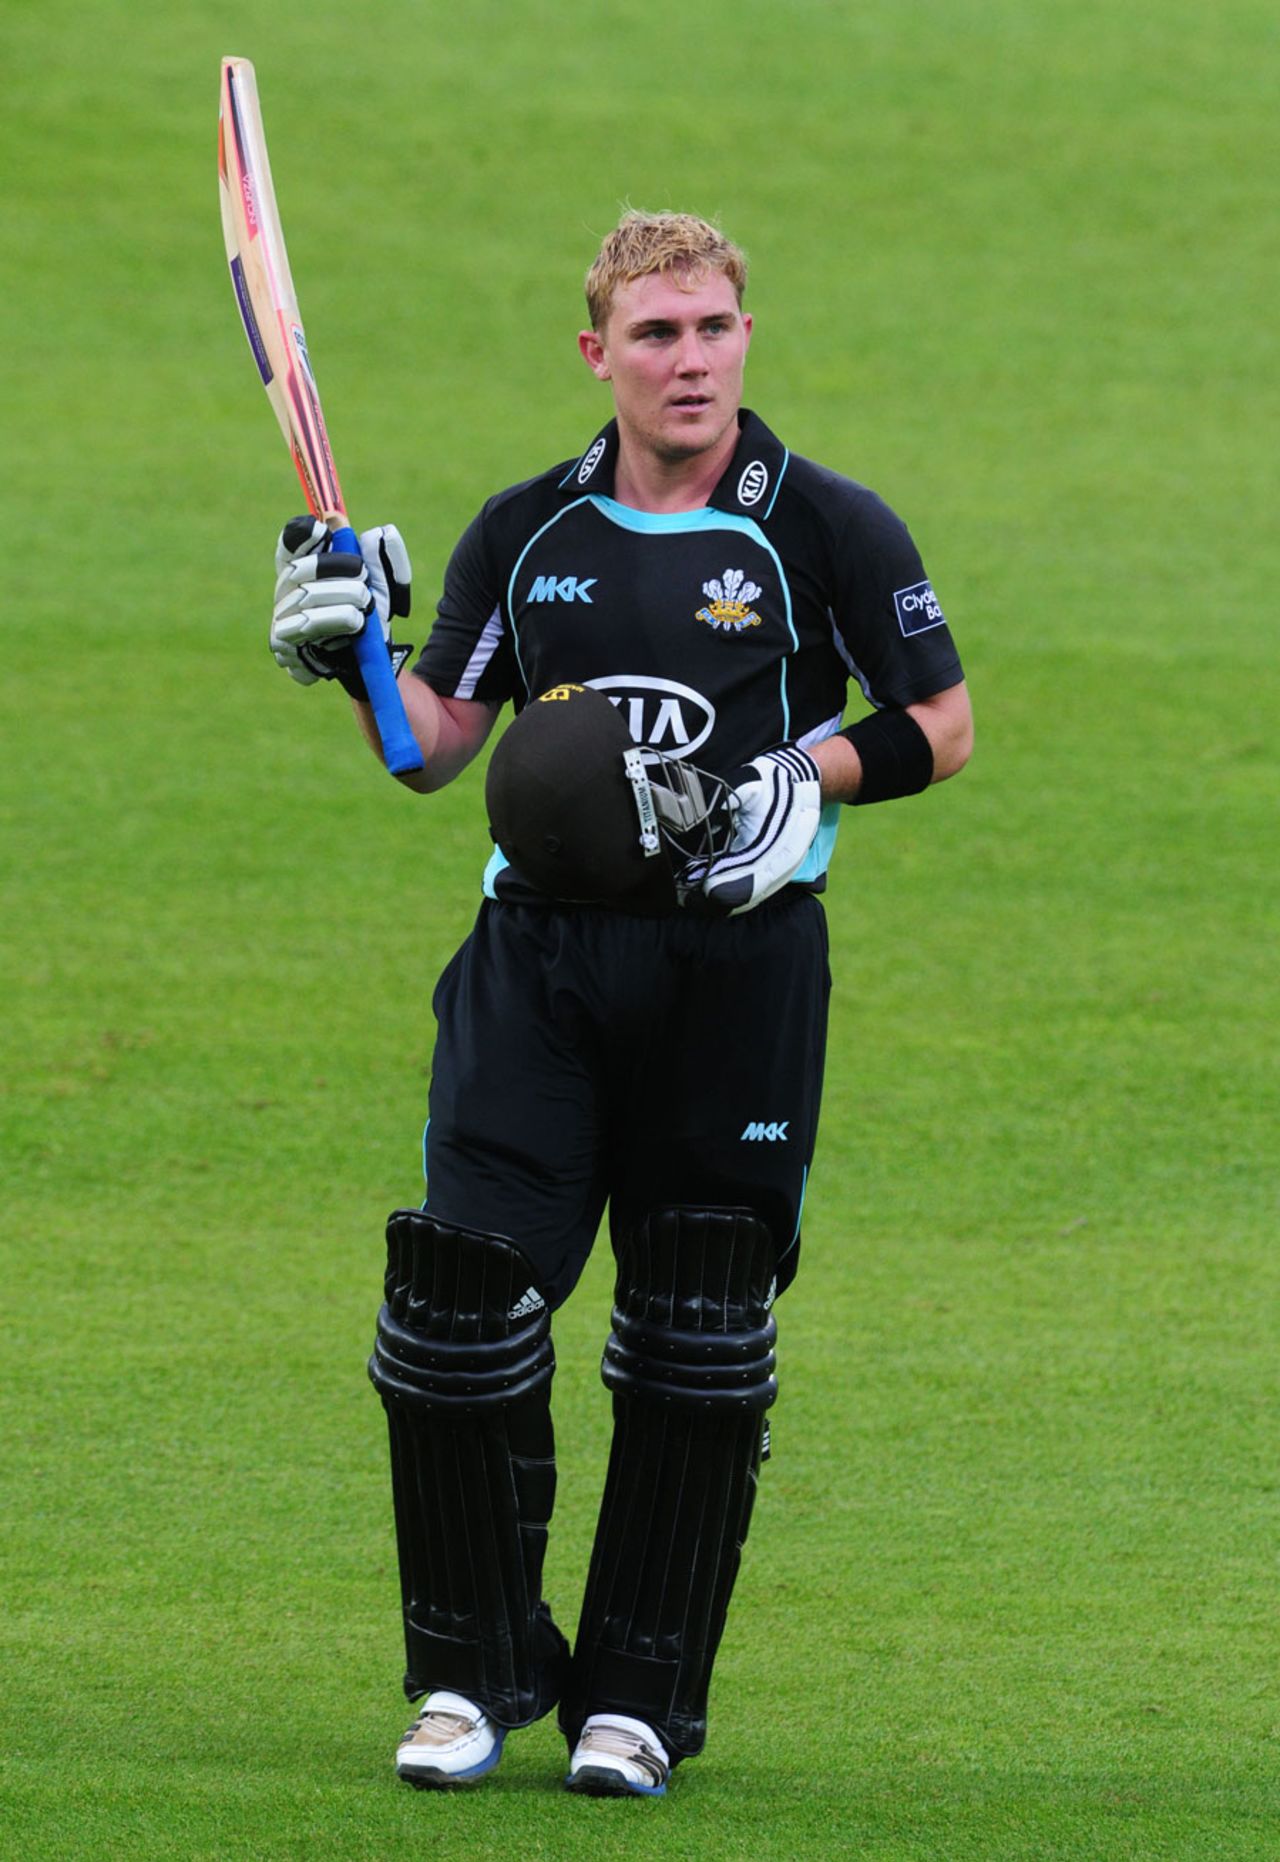 Rory Hamilton-Brown scored 101 from 89 balls, Surrey v Somerset, CB40, Group B, The Oval, May 4, 2012